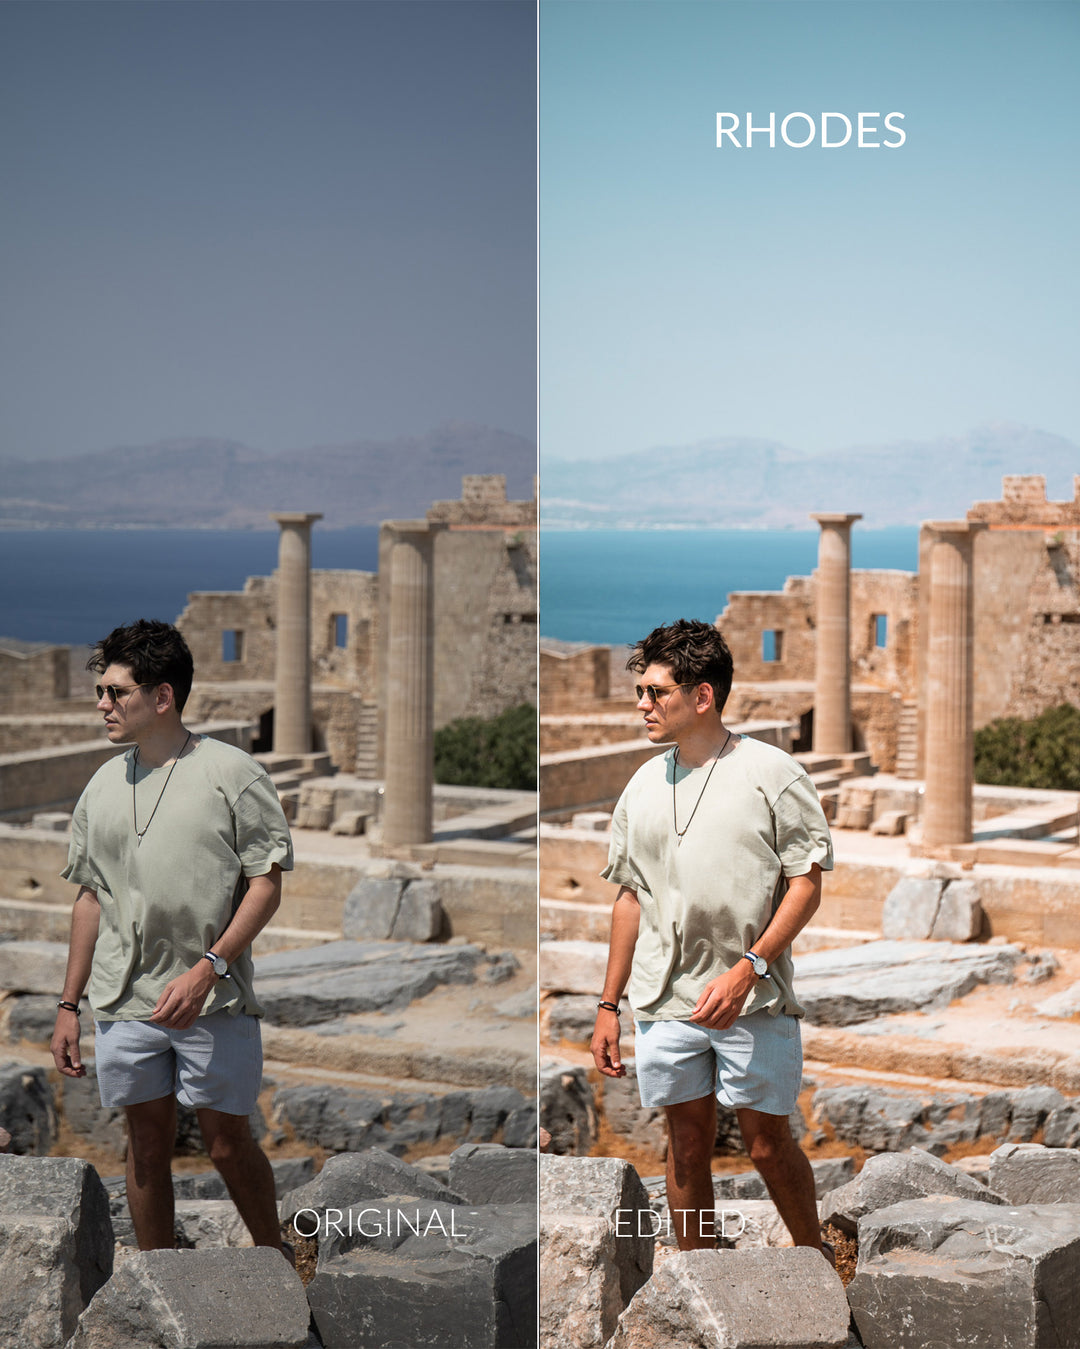 Greek Islands Collection